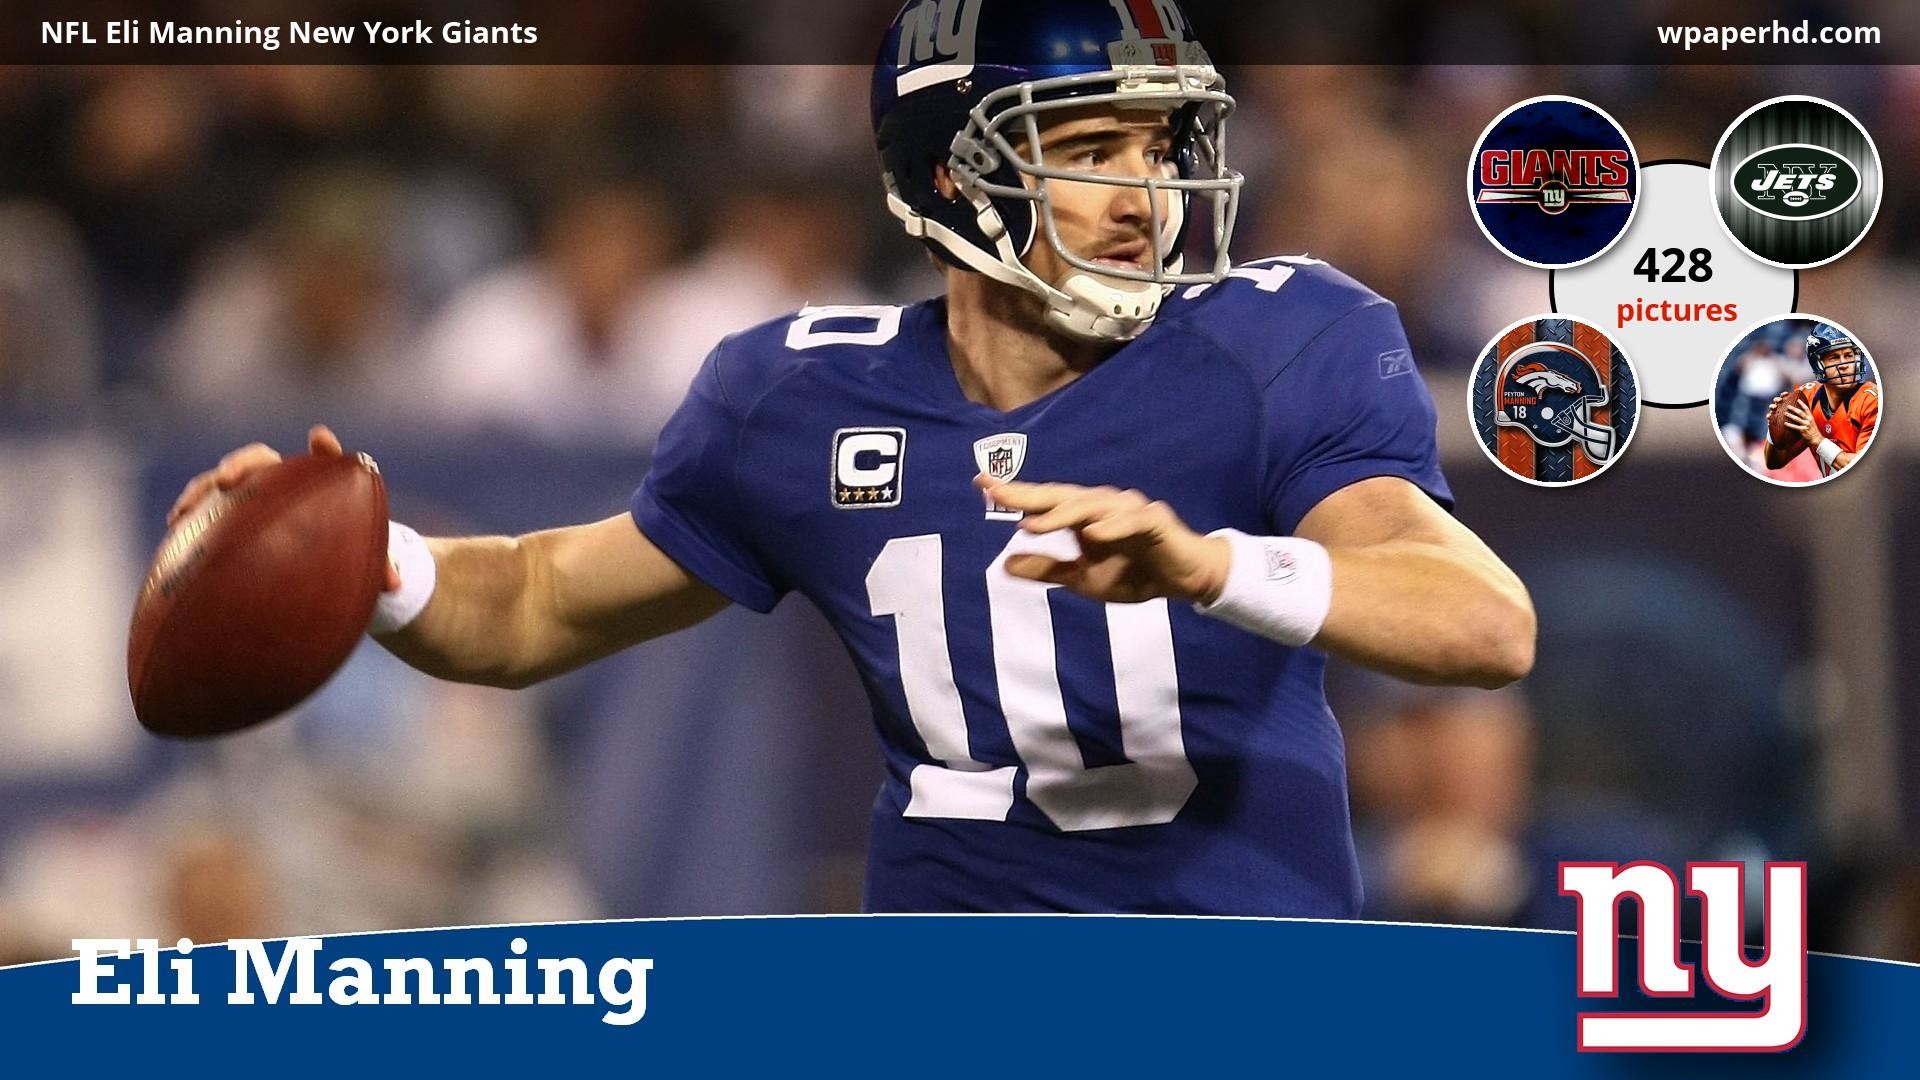 1920x1080 Description NFL Eli Manning New York Giants wallpaper from Football  category. You are on page with NFL Eli Manning New York Giants wallpaper ...